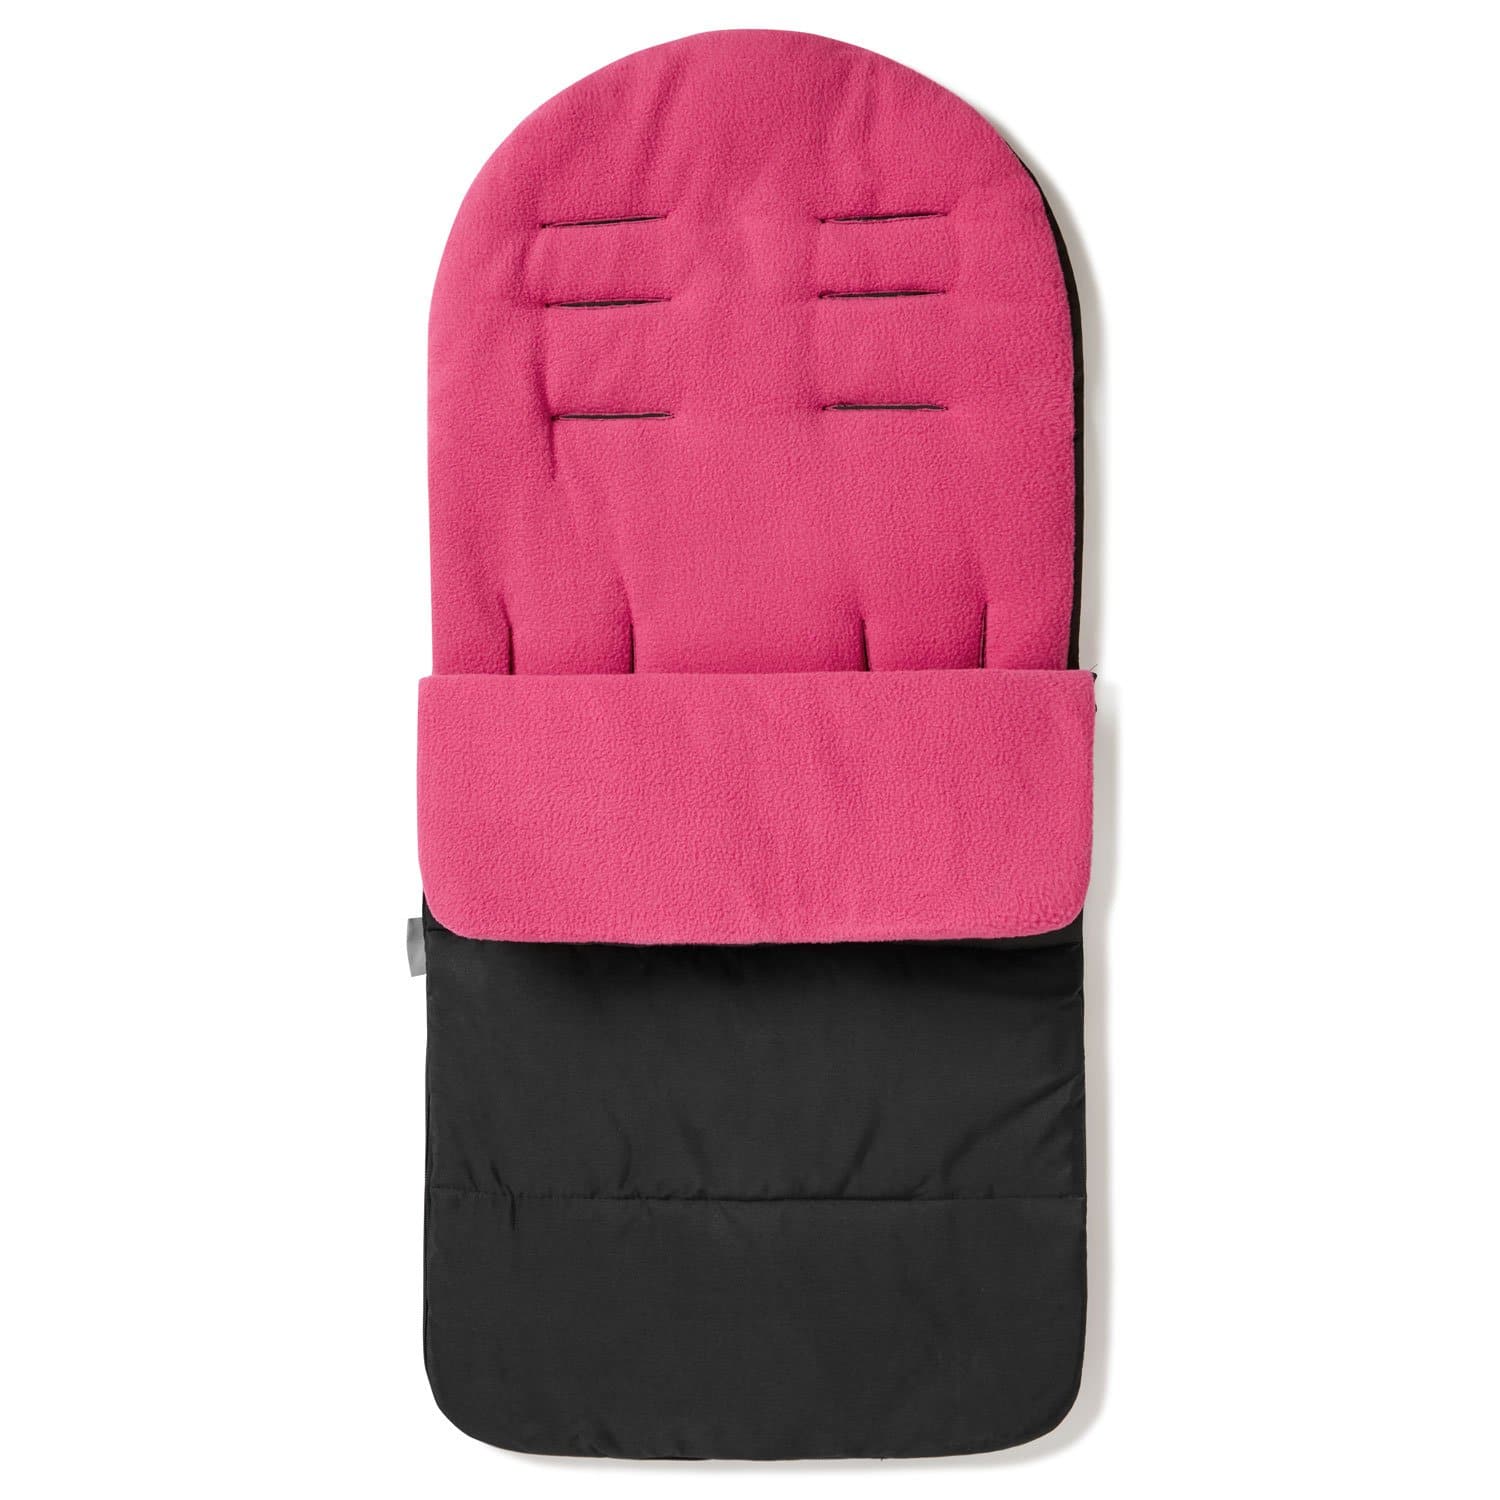 Premium Footmuff / Cosy Toes Compatible with Firstwheels - Pink Rose / Fits All Models | For Your Little One